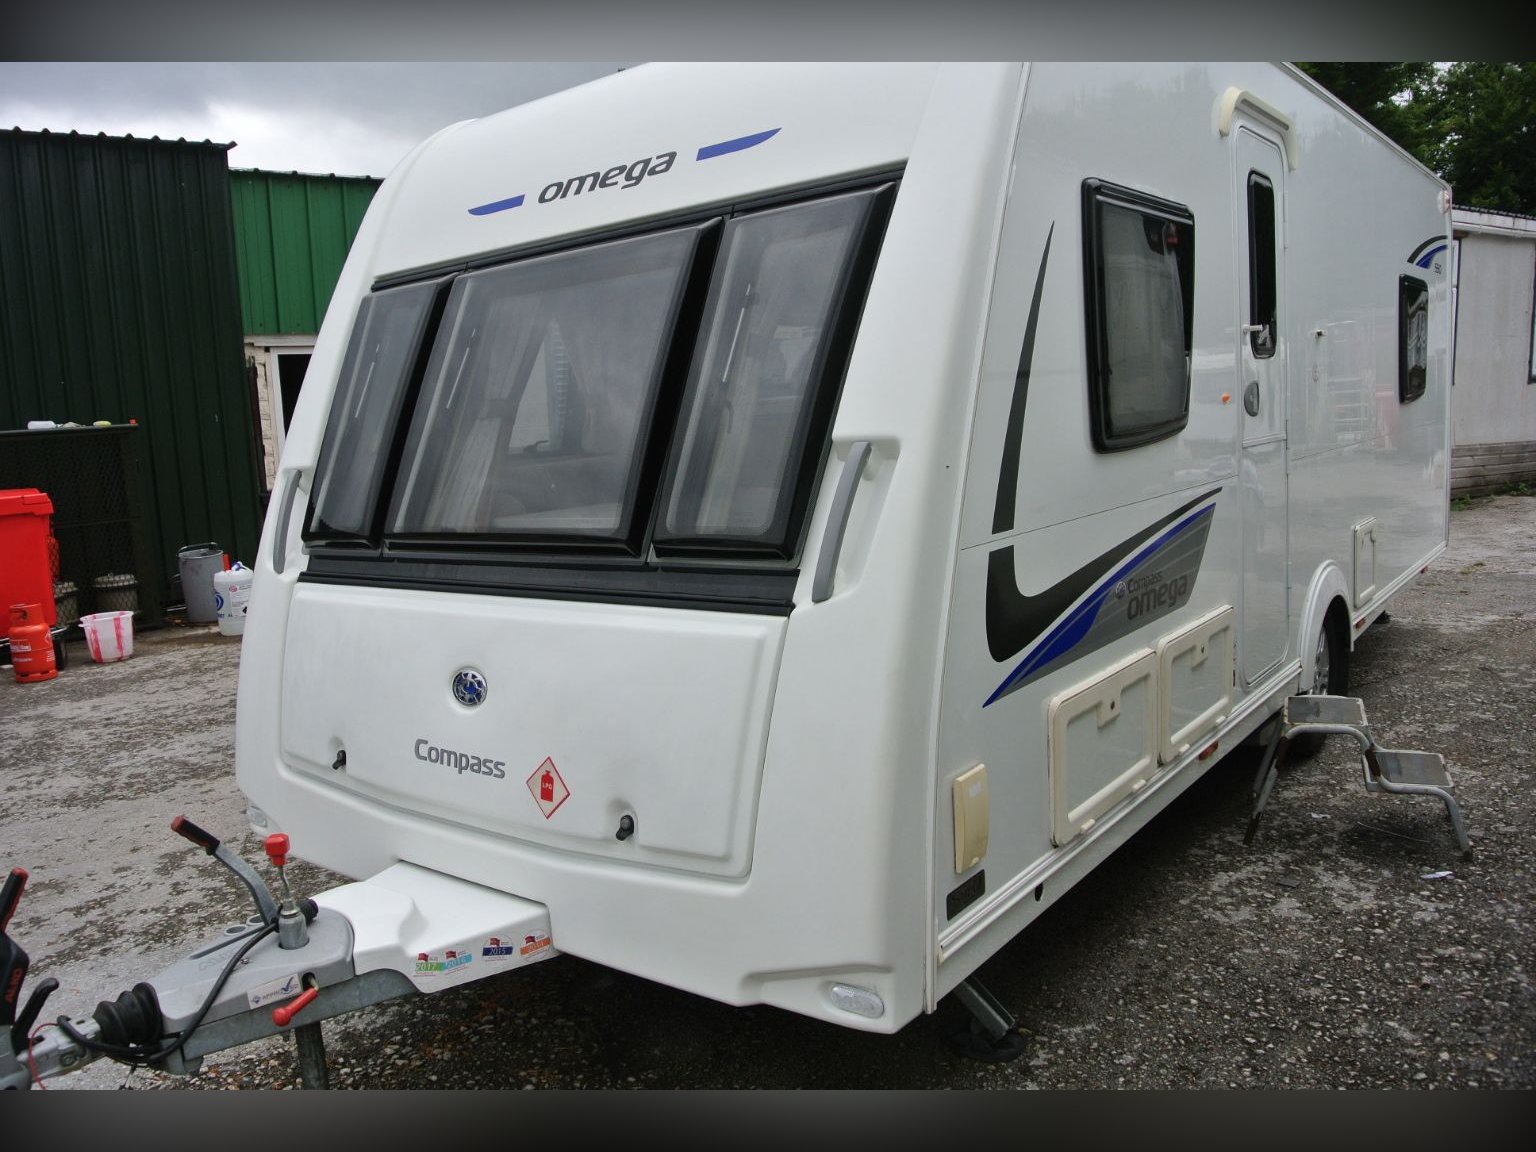 Sold 2014 Compass Omega 550 sold 